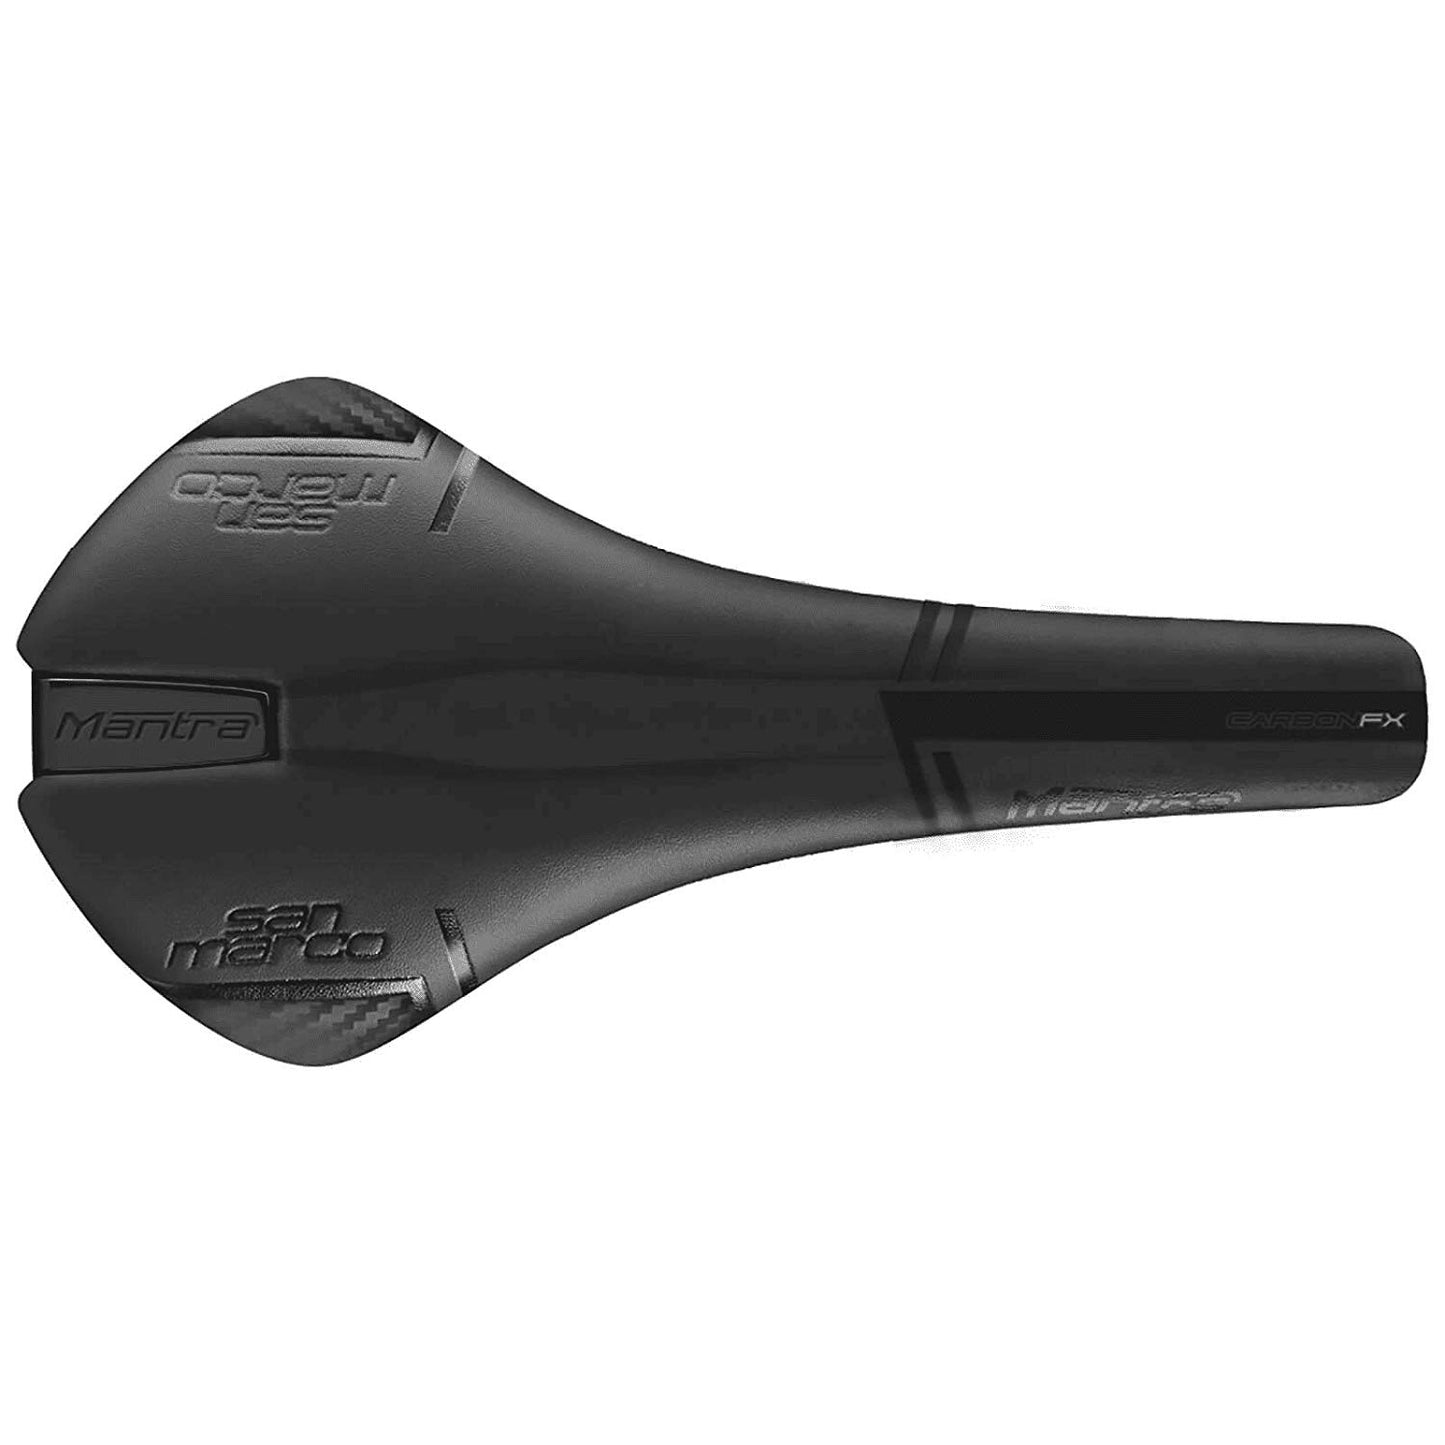 NEW Selle San Marco Mantra Dynamic Saddle Full Fit Wide Manganese Black Road L1